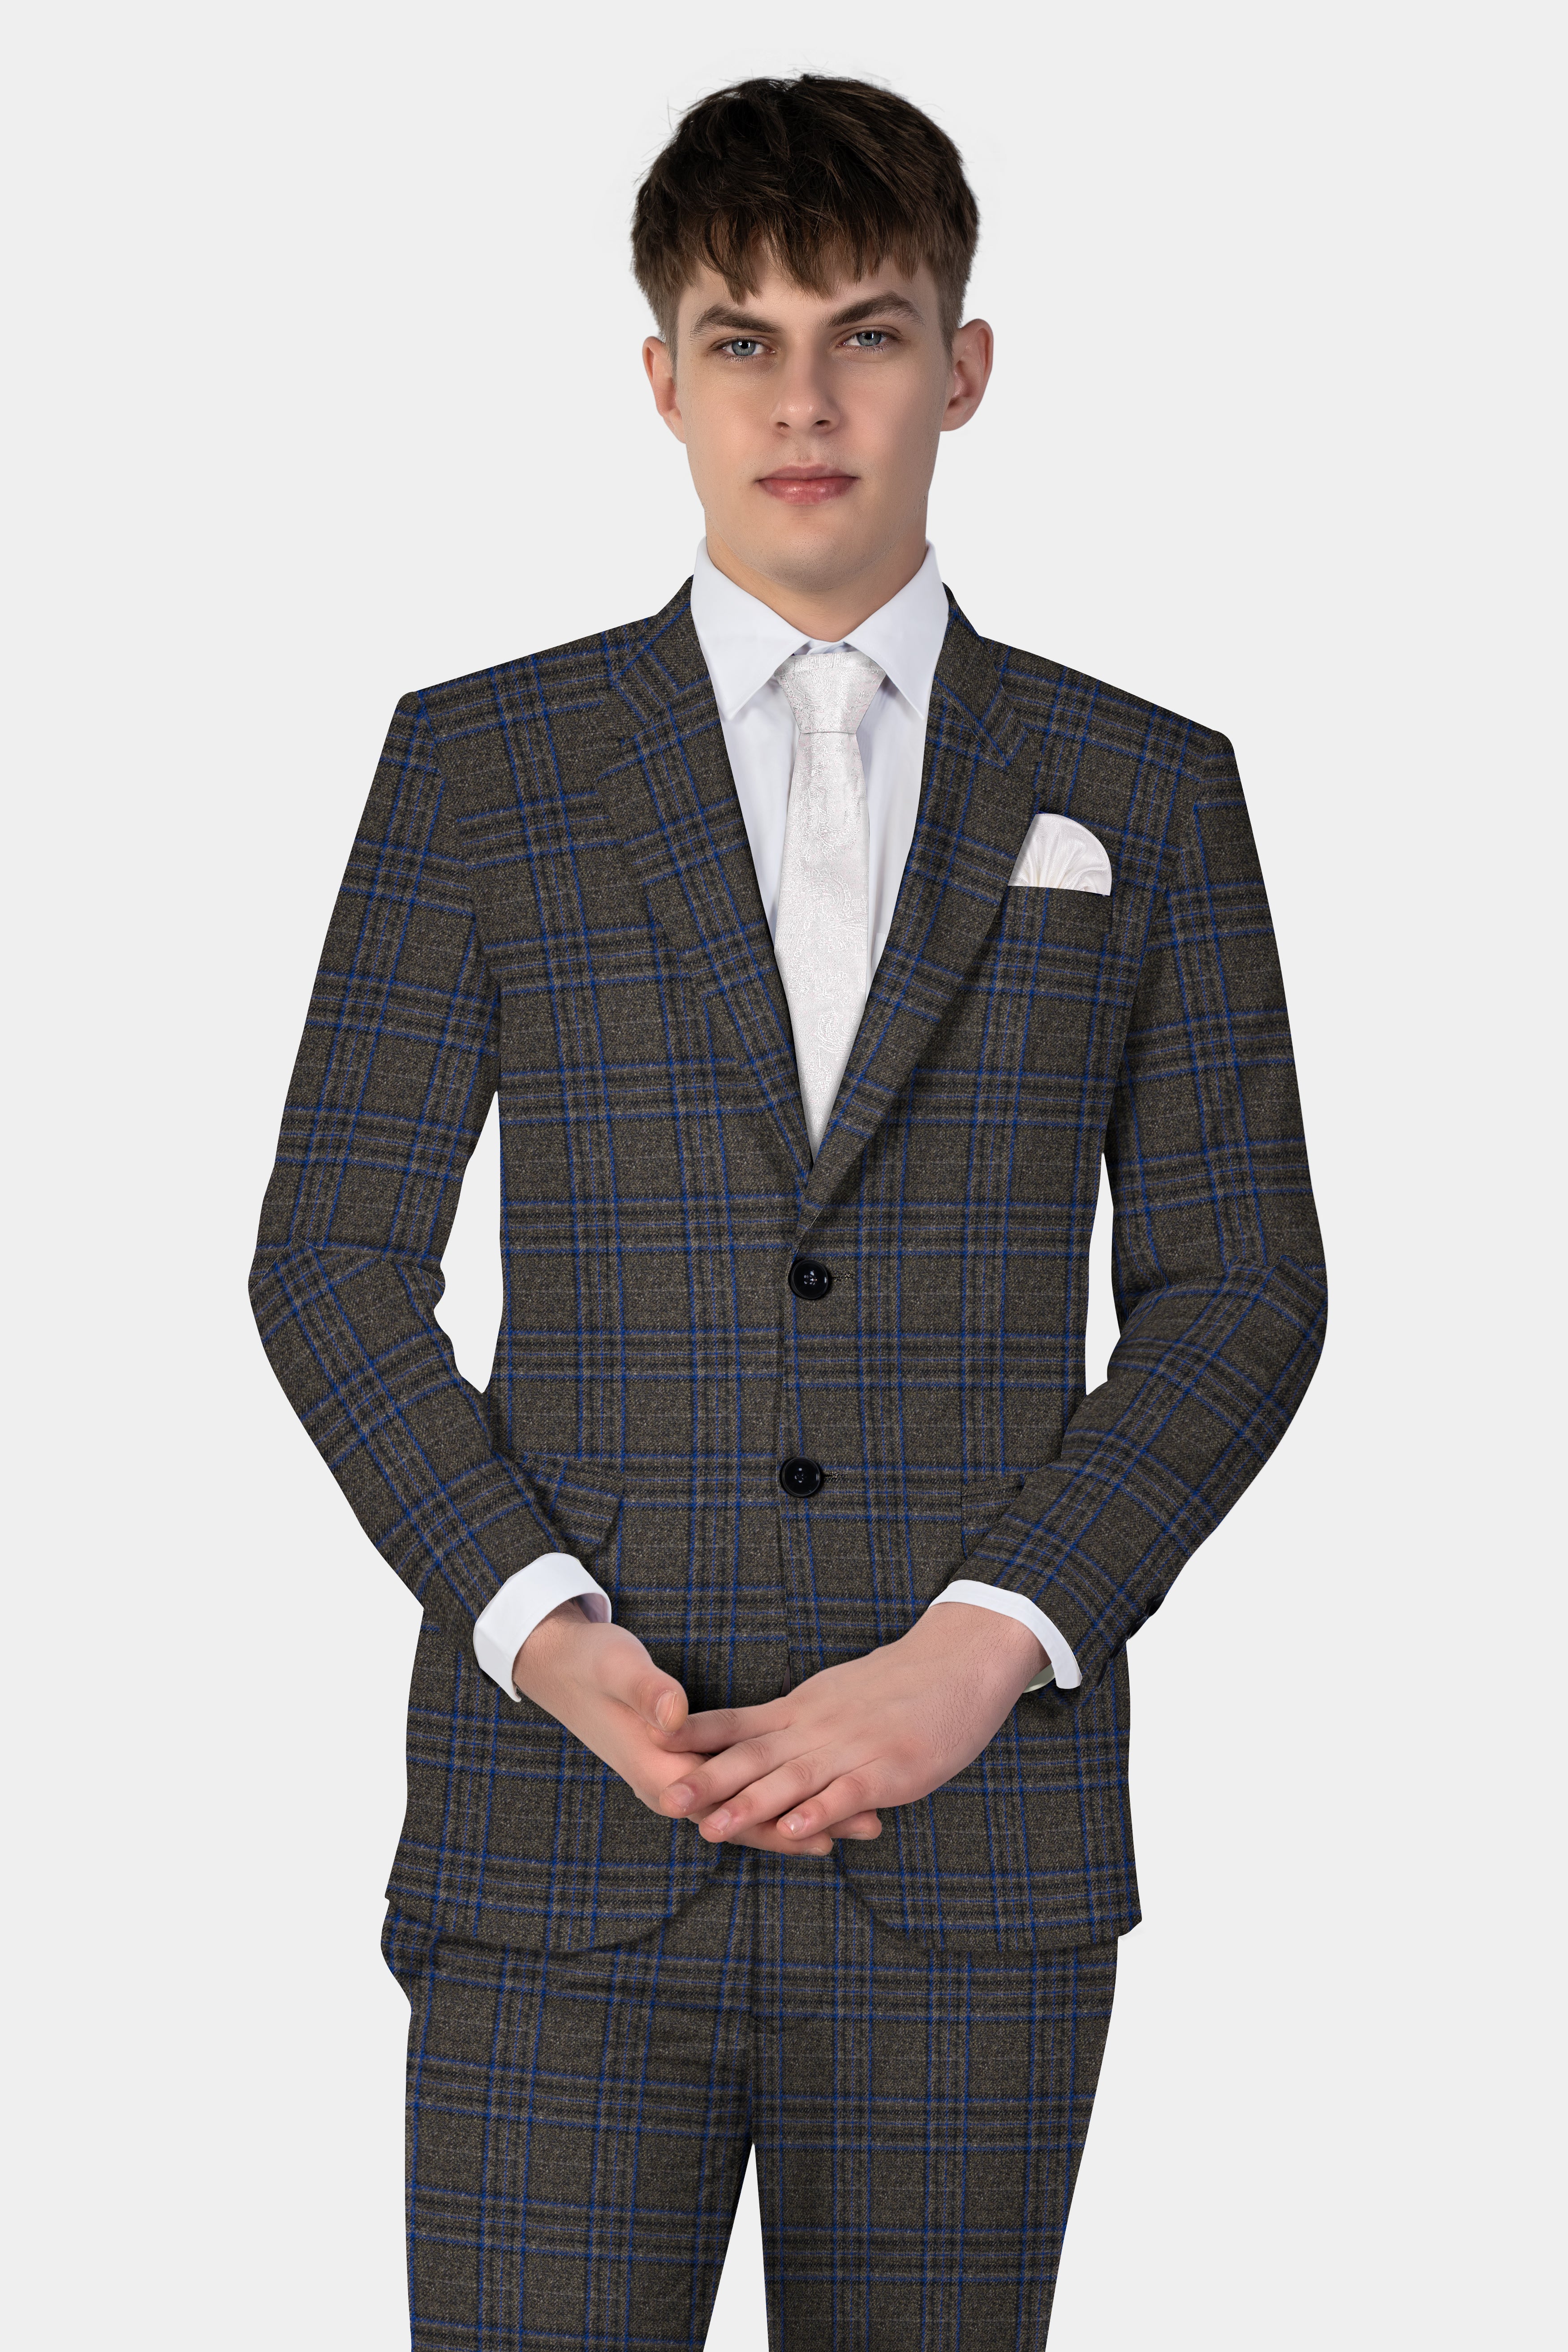 Shark Gray with Chambray Blue Plaid Tweed Suit